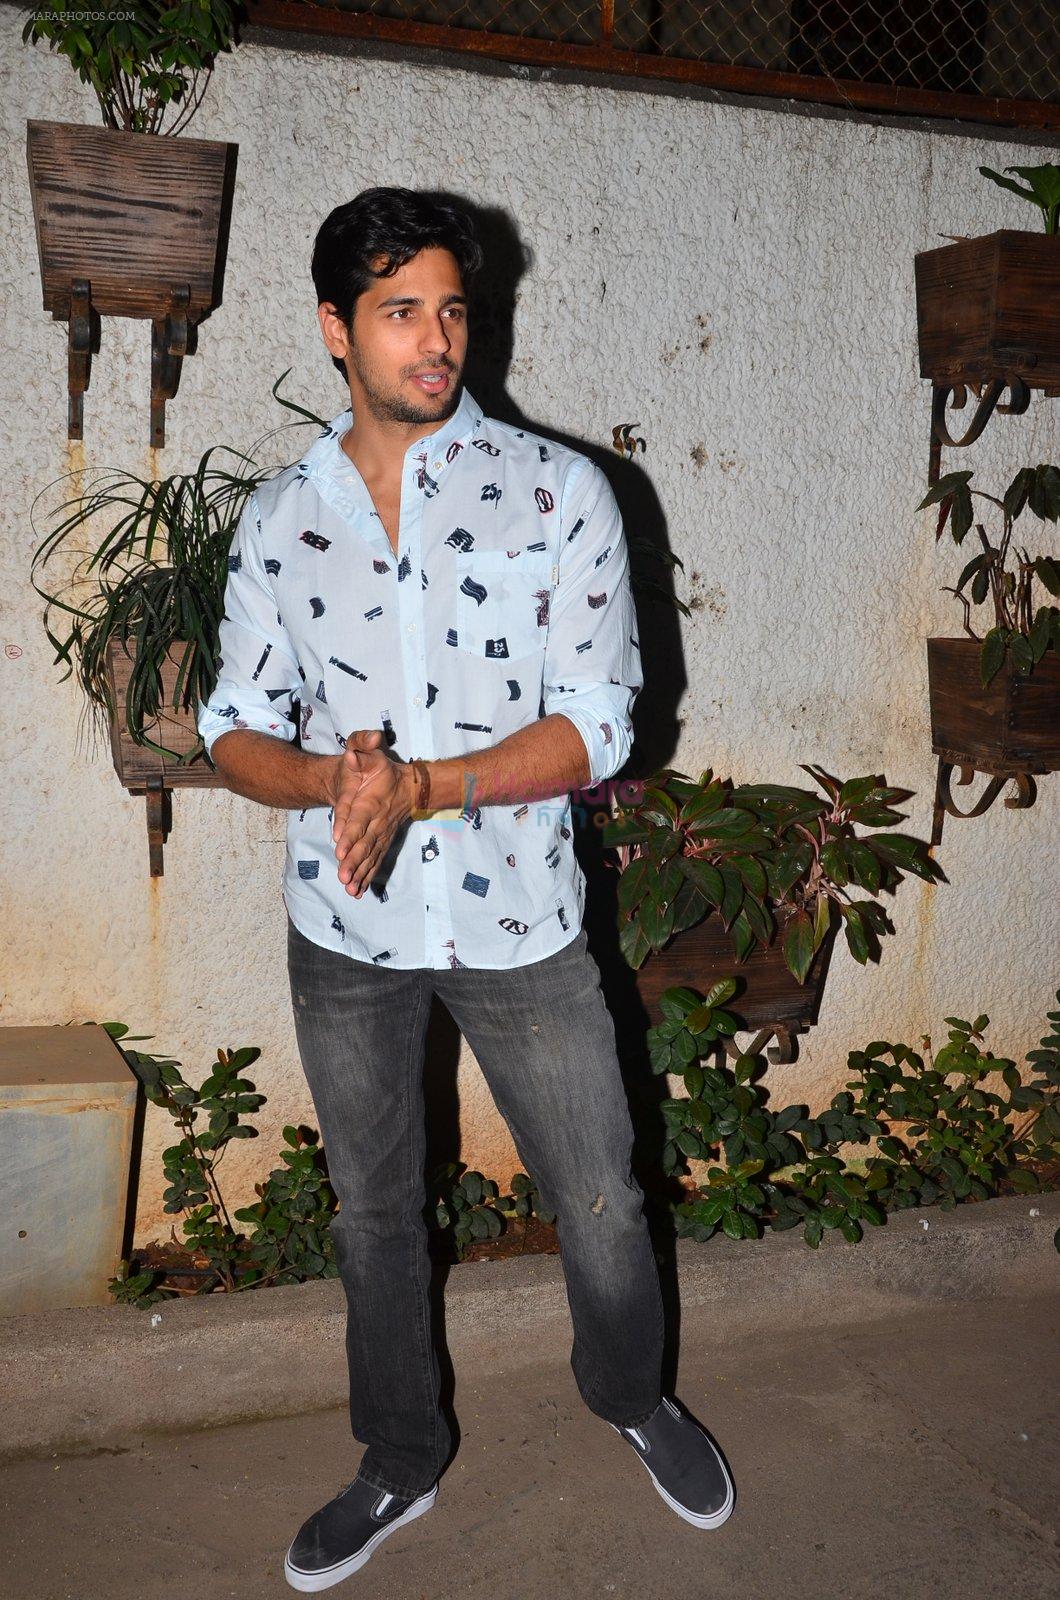 sidharth Malhotra's screening for kapoor n sons on 17th March 2016